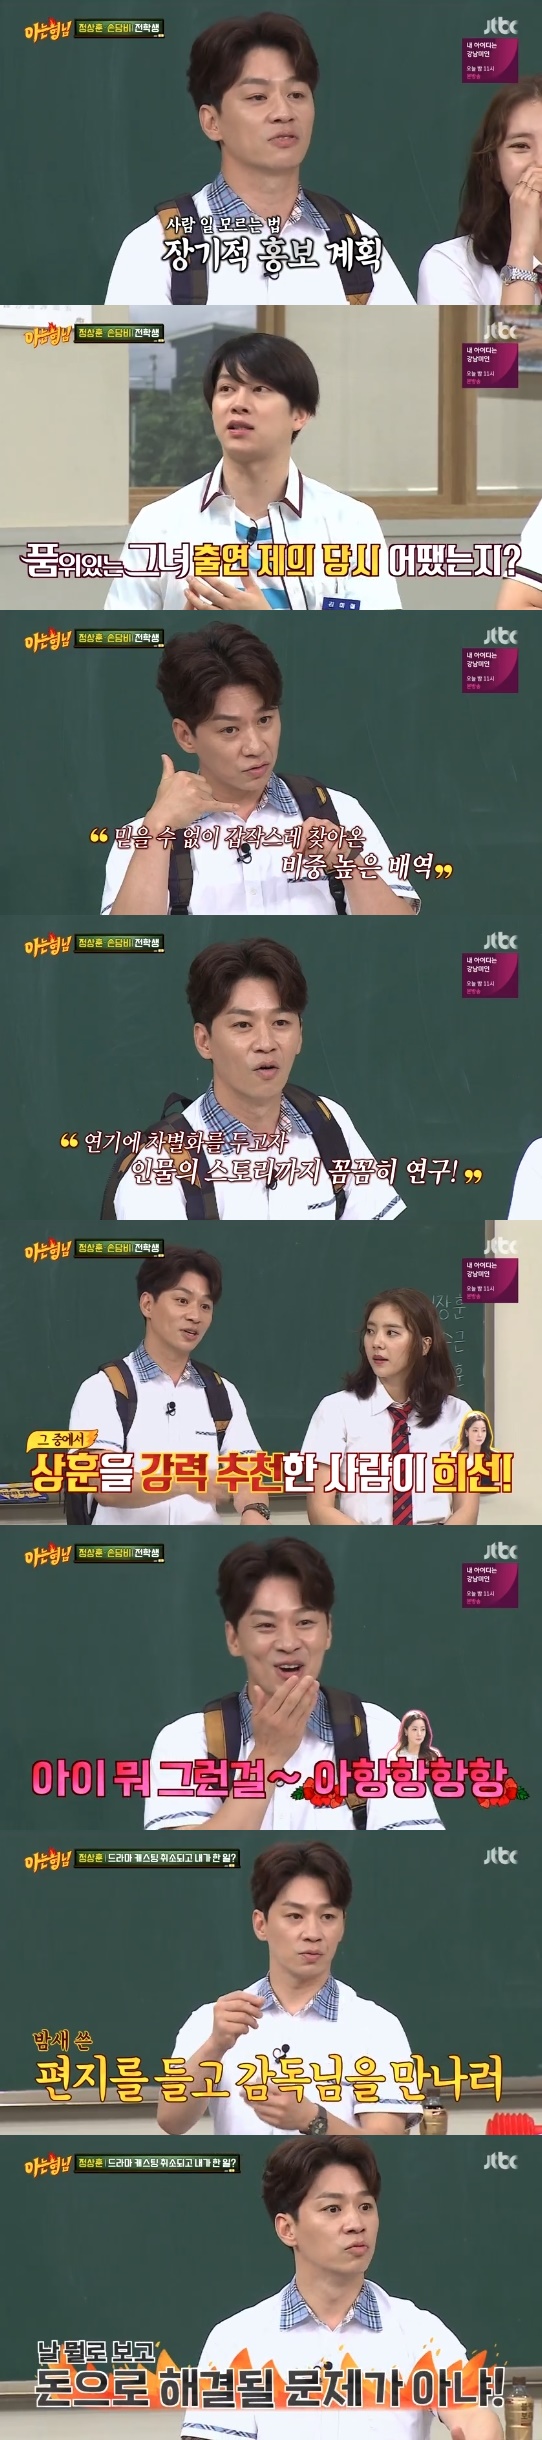 Knowing Brother Jung Sang-hoon has made his brothers clunk with episodes that have been uploaded to Passion since the days of obscurity.Actors Jung Hoon and Son Dam-bi appeared as guests in the movie Rose of the Rebellion on JTBC Knowing Brother broadcast on the 11th.On this day, Jung Sang-hoon and Son Dam-bi said, The movie was originally released in August, but there were so many masterpieces that I was pushed to October.I did not believe that she was cast in the JTBC drama Grace She, said Jung Hoon. I did not believe it because there were many castings.He kept pushing himself after the coach gave him confidence.The reason was because of the sadness of the unknown days. The cast was cast as the main character in a drama, and both acquaintances and family liked it, but the casting was canceled in three days.At that time, Jung Sang-hoon found the bishop with a four-page letter that clearly wrote the reason for his acting, but he also revealed the story that he was misunderstood as a money bag and could not deliver it.Jung Sang-hoon, who was nominated for the final three candidates in Grace She, said, Kim Hee-sun recommended it.Later, when I heard and asked, Kim Hee-sun laughed at me saying, Im a child or something.In addition, the drama was able to perform well, and all of the things that his acting was able to stand out were thanks to Kim Hee-suns acting.Jung Hoon revealed the audition rules that are contrary to the given script, and on the spot, he played the man who called his wife after being sentenced to the deadline, and stimulated his brothers eyes.Jung Sang-hoon, who has been running with a Passion for acting for a long time, applauded his brothers as well as viewers.Photo: JTBC